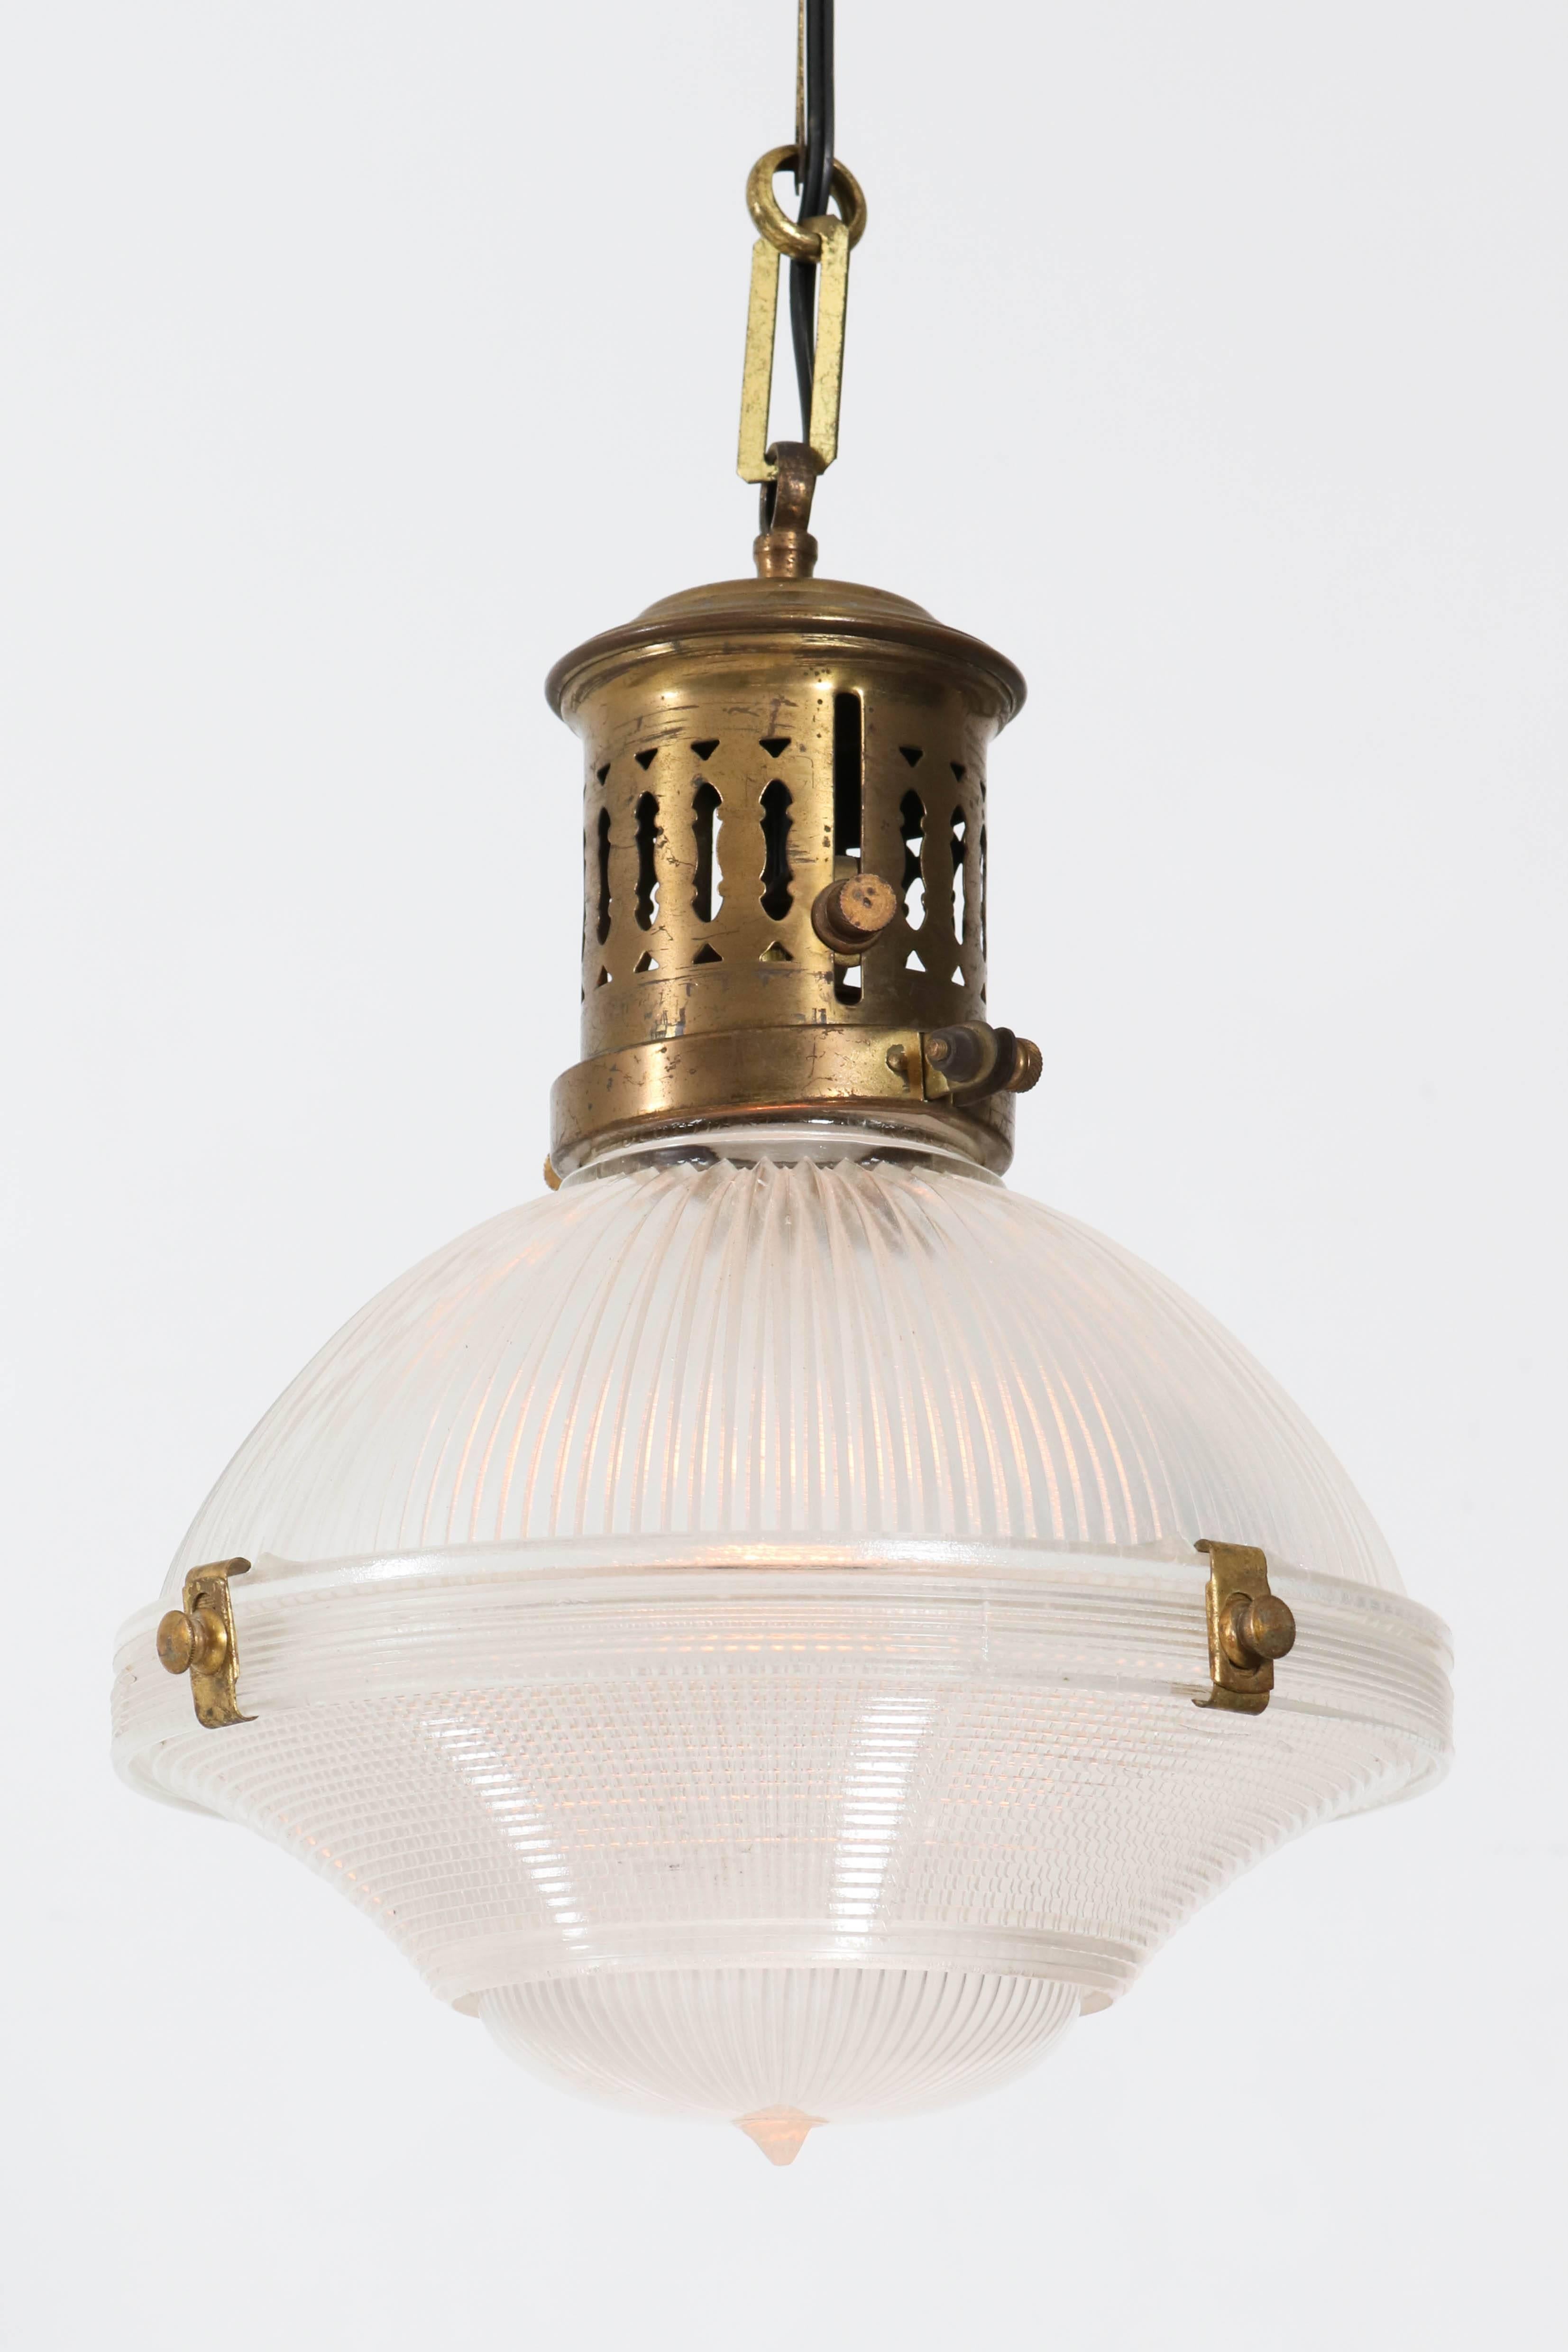 Rare three-piece Holophane pendant light, 1915.
Early design with brass and prismatic glass shades.
This shade has three pieces, the two larger parts are held together
with four snap on clips.
The third part is the small bottom dome insert, the